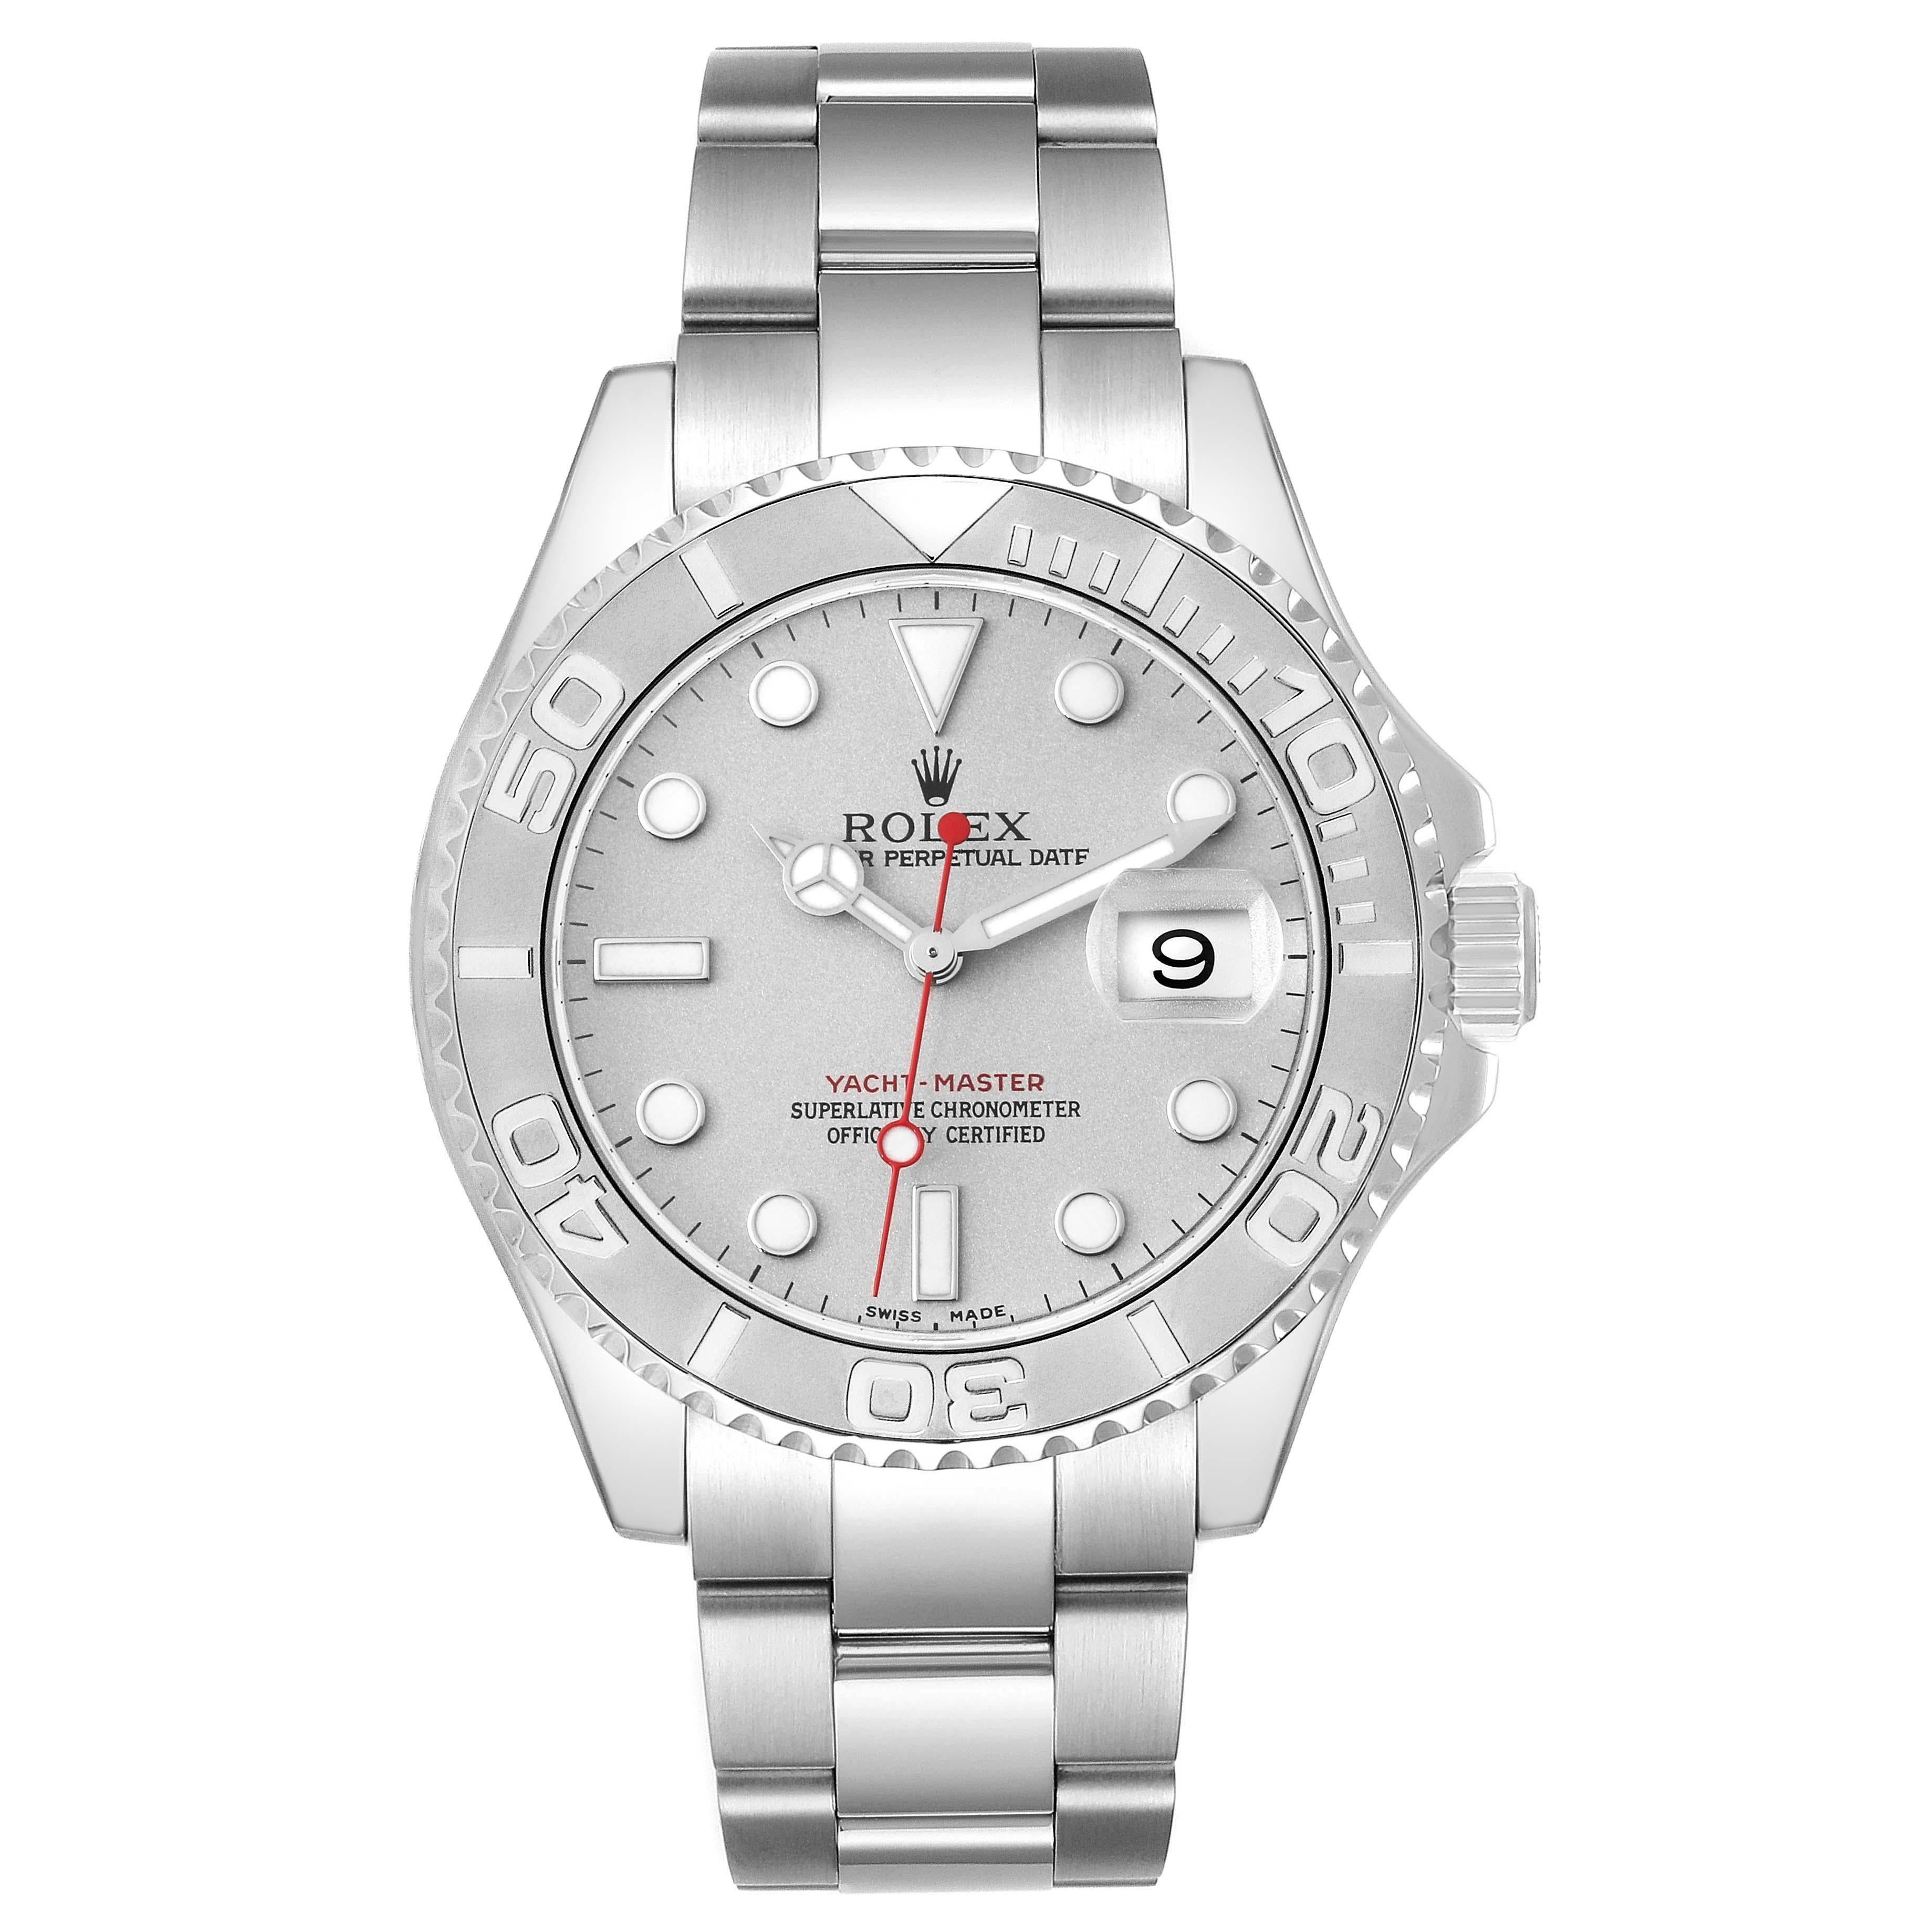 Rolex Yachtmaster Platinum Silver Dial Steel Mens Watch 16622 Box Papers. Officially certified chronometer automatic self-winding movement. Stainless steel case 40.0 mm in diameter. Rolex logo on the crown. Platinum special time-lapse bidirectional